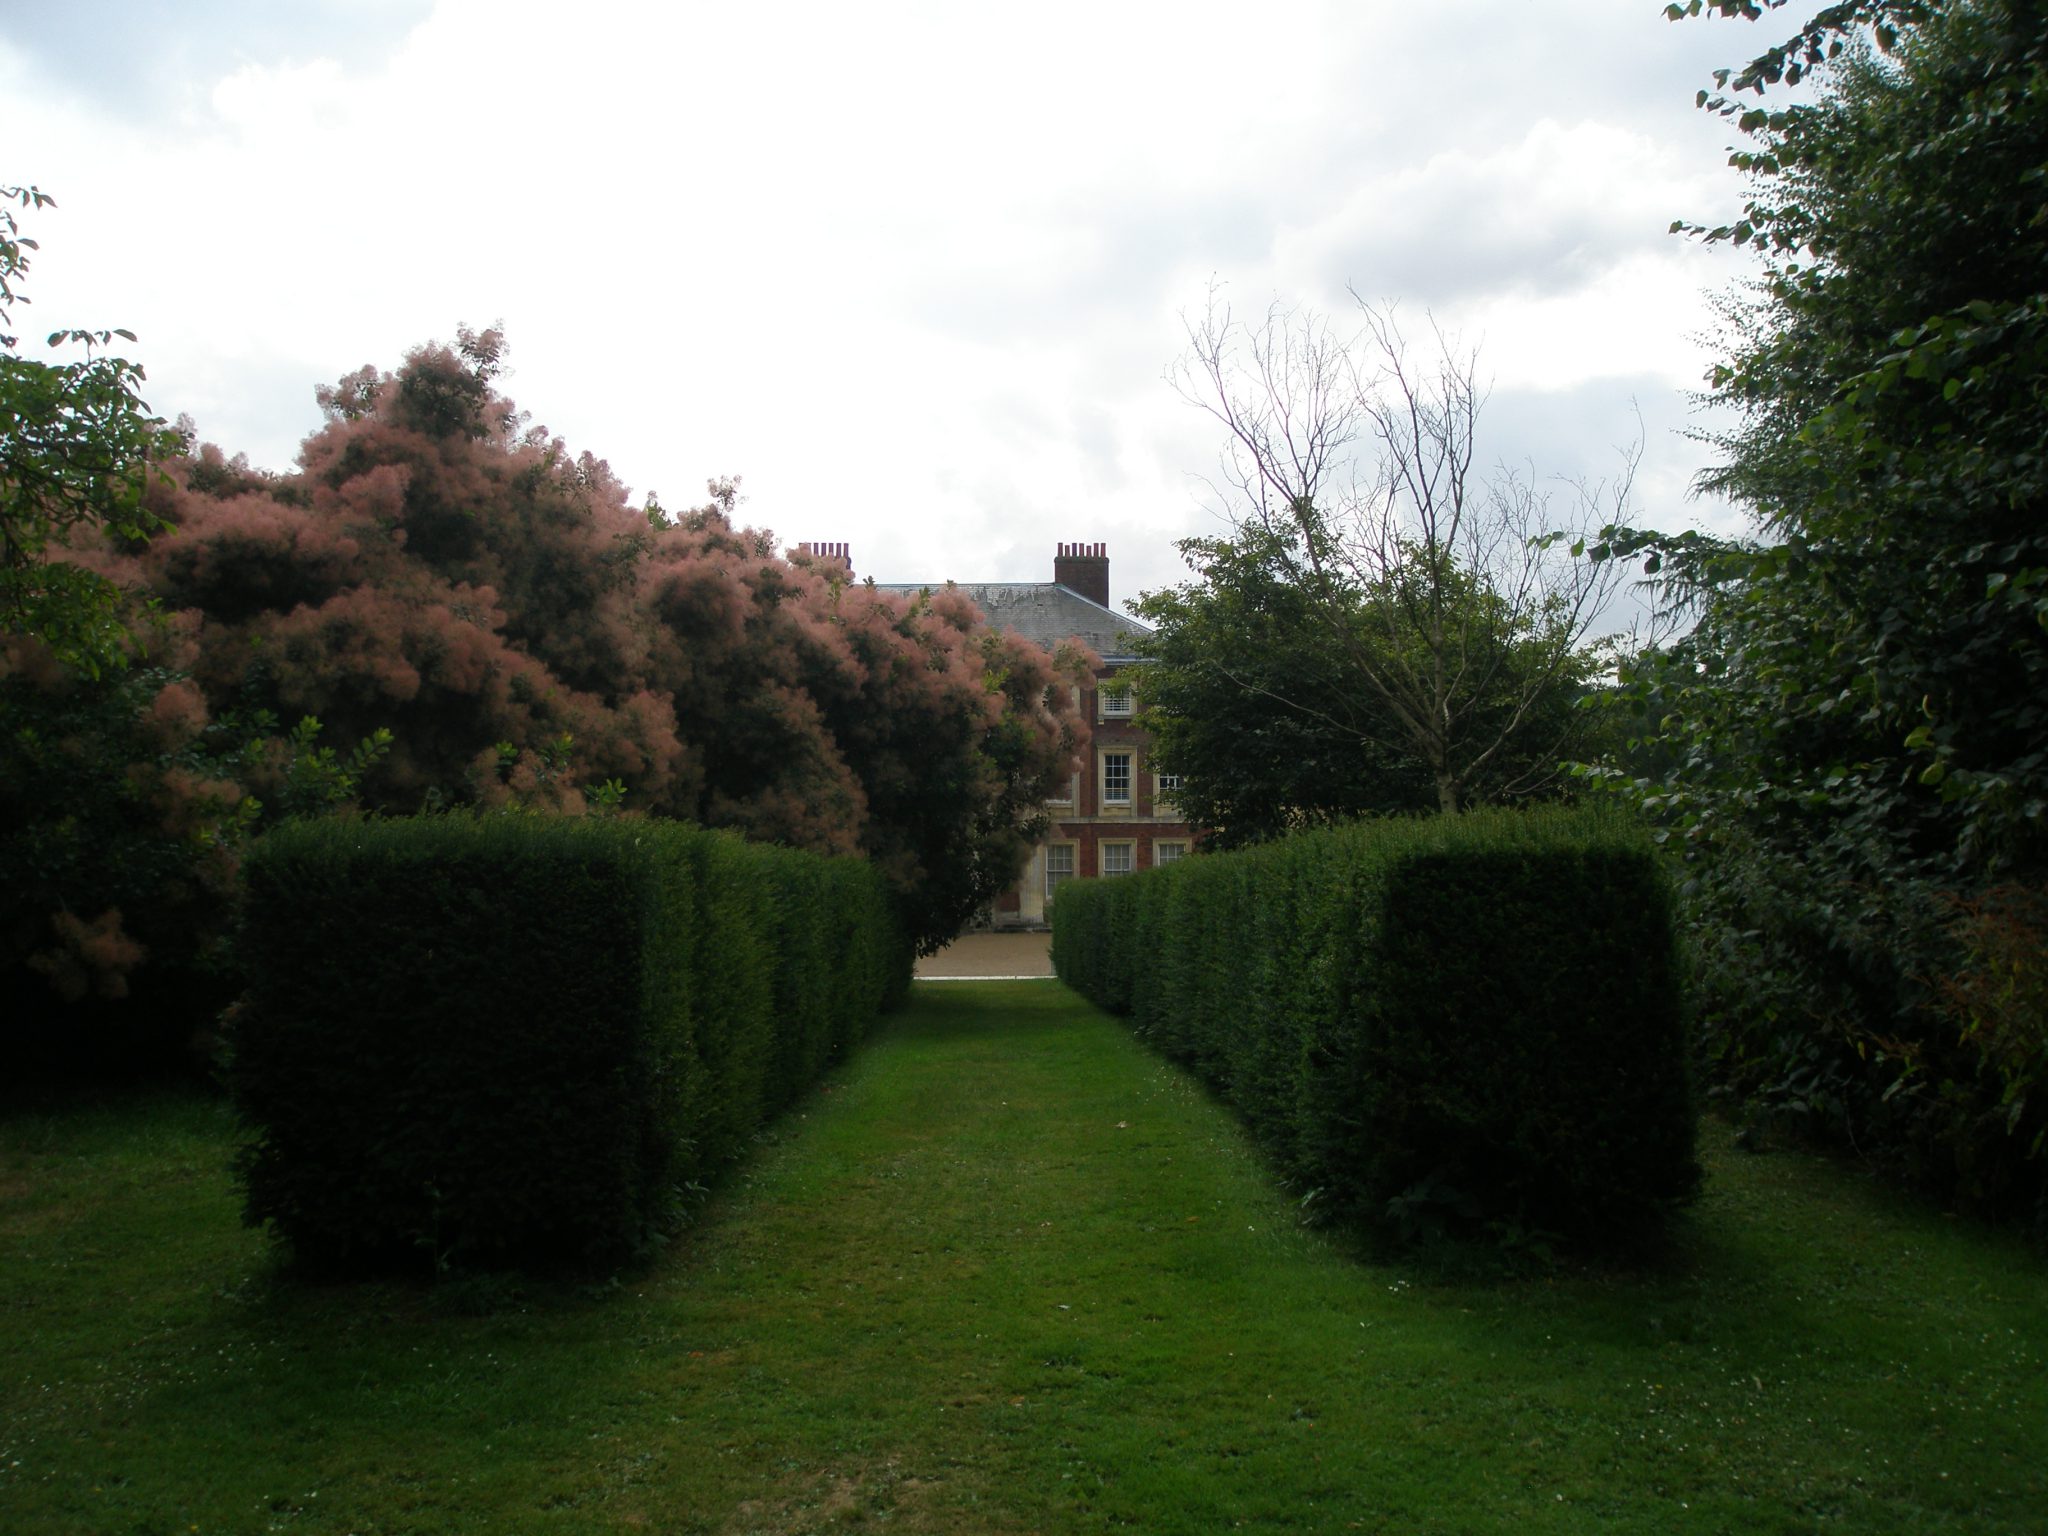 After the smoke bush, a narrow, yew-hedged walk leads us away from the House, toward a Long Avenue of Lime Trees.